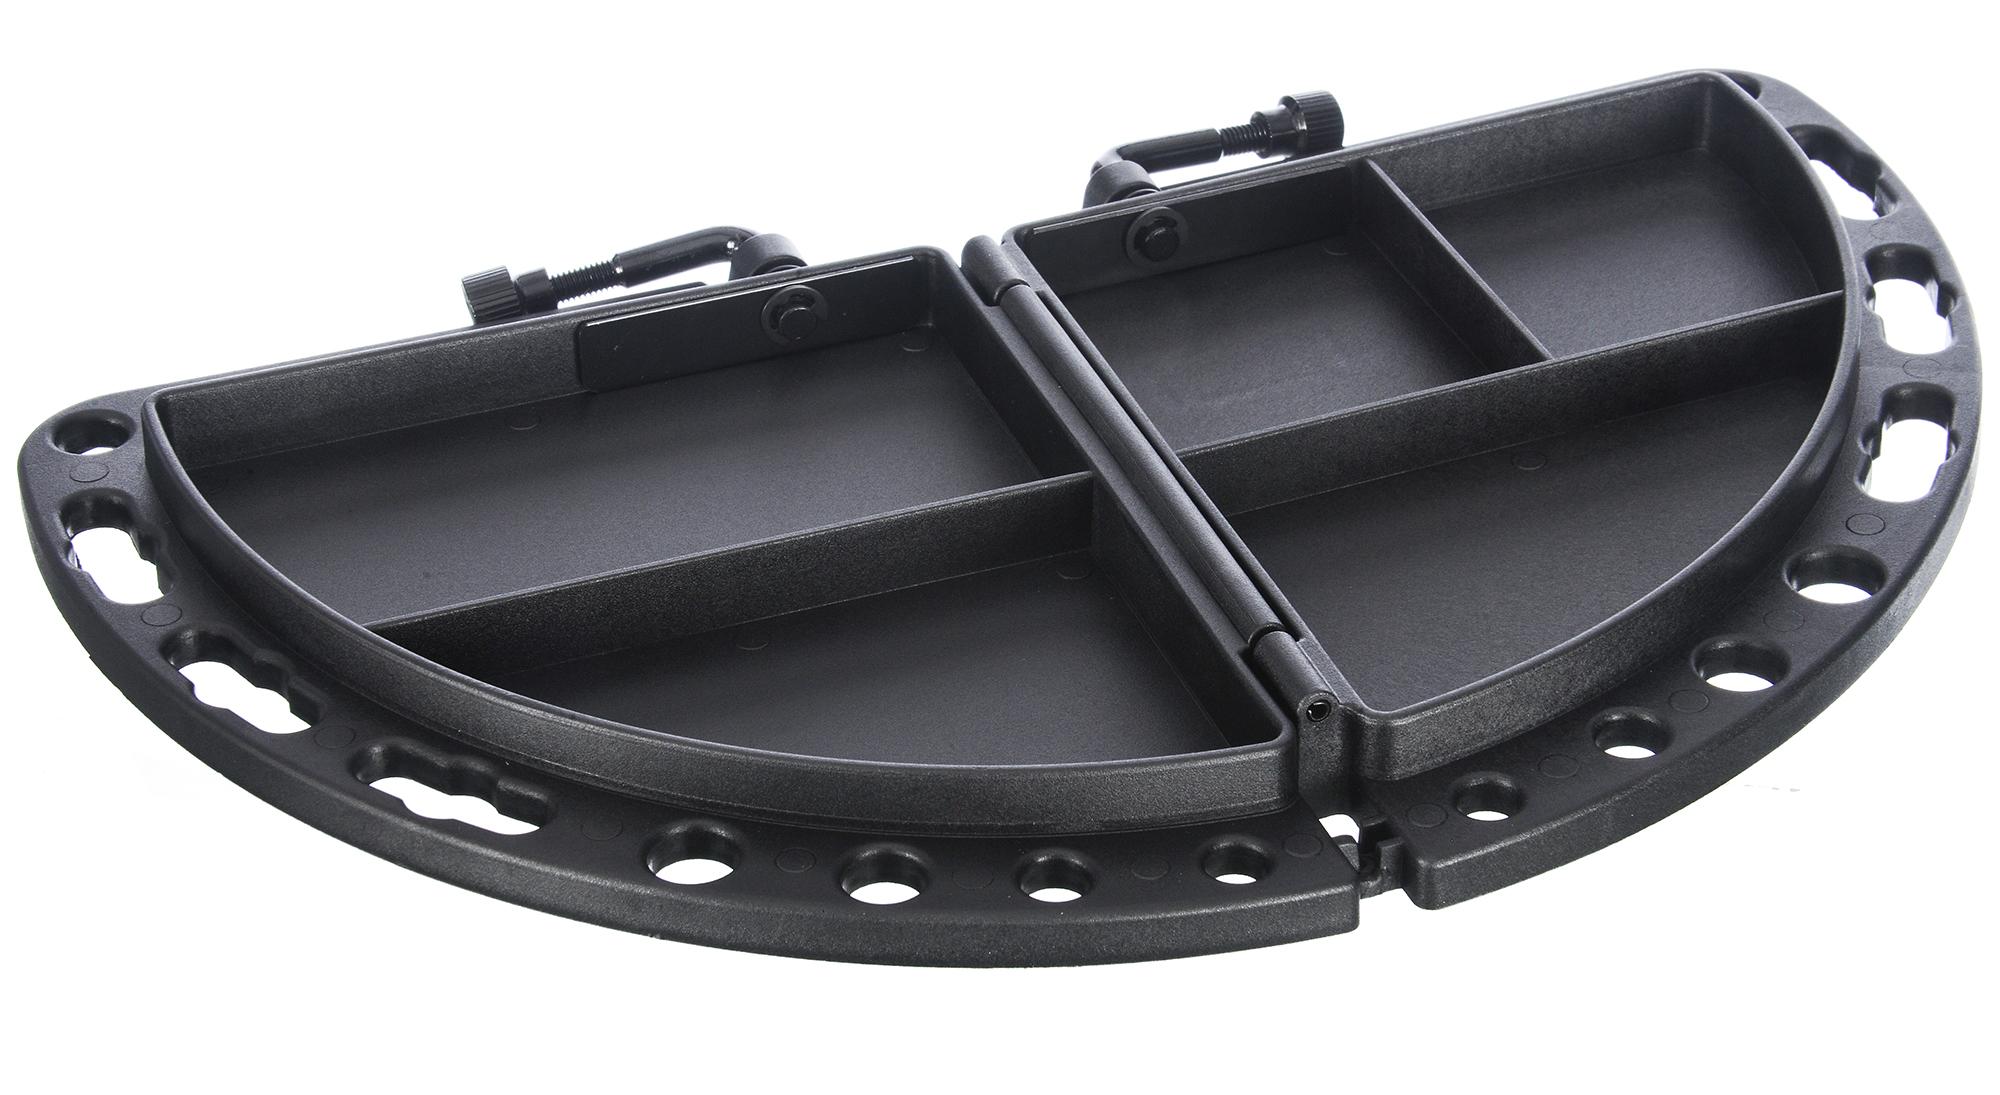 Lifeline Tool Tray For Workstand - Black